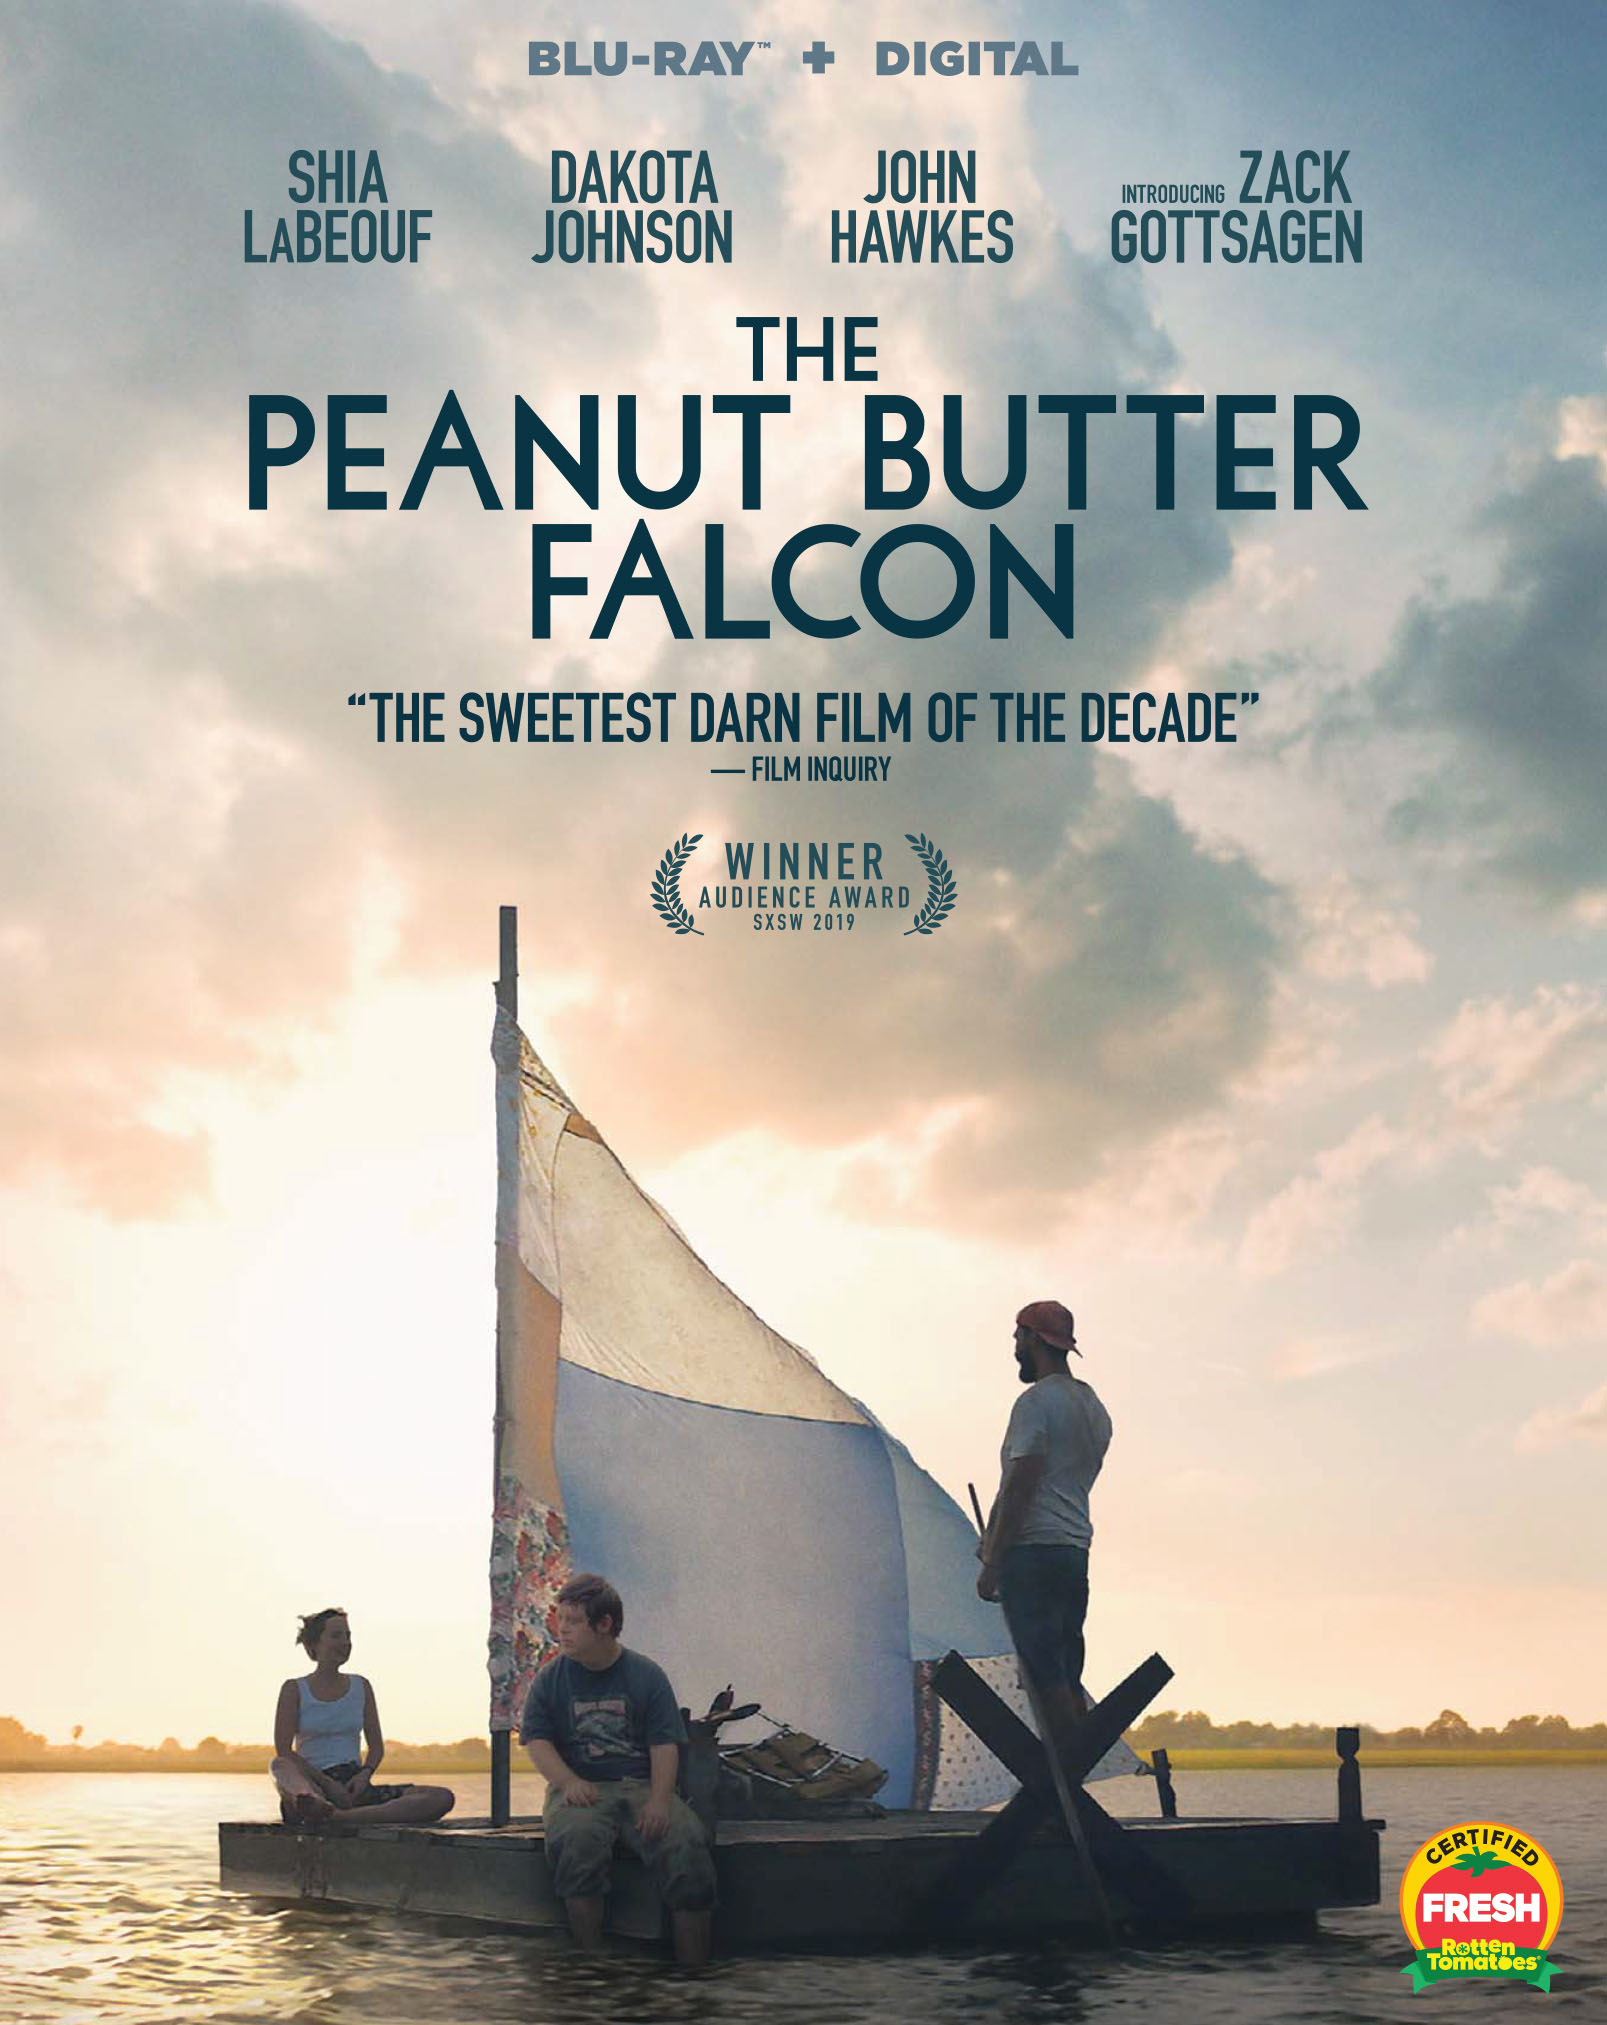 The peanut butter falcon [DVD] (2019).  Directed by Tyler Nilson and Michael Schwartz.